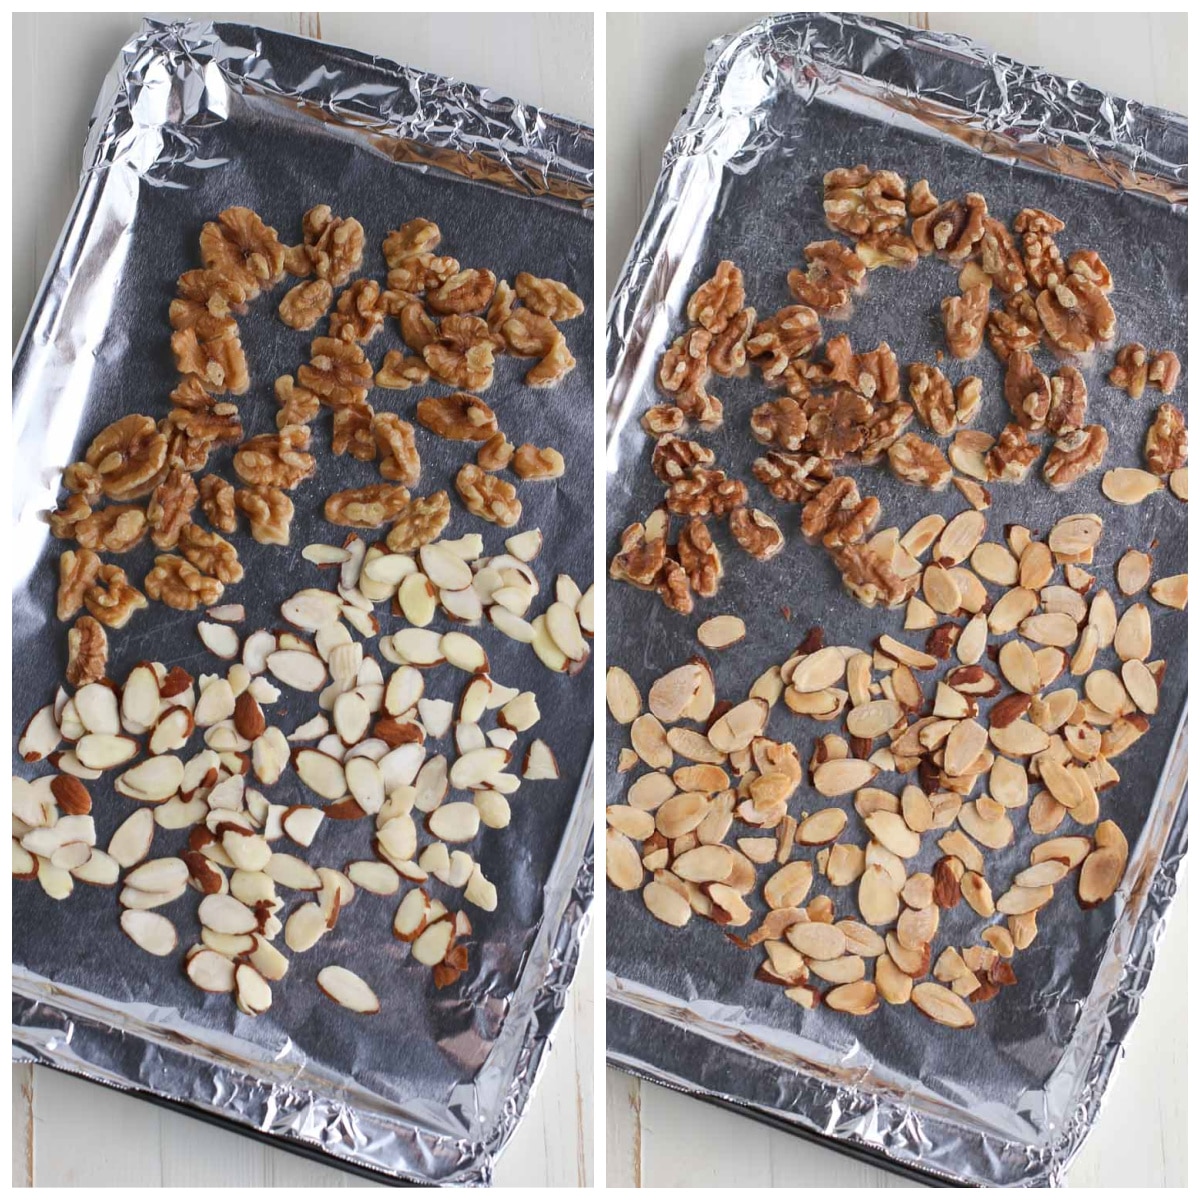 Two images comparing raw nuts and toasted nuts